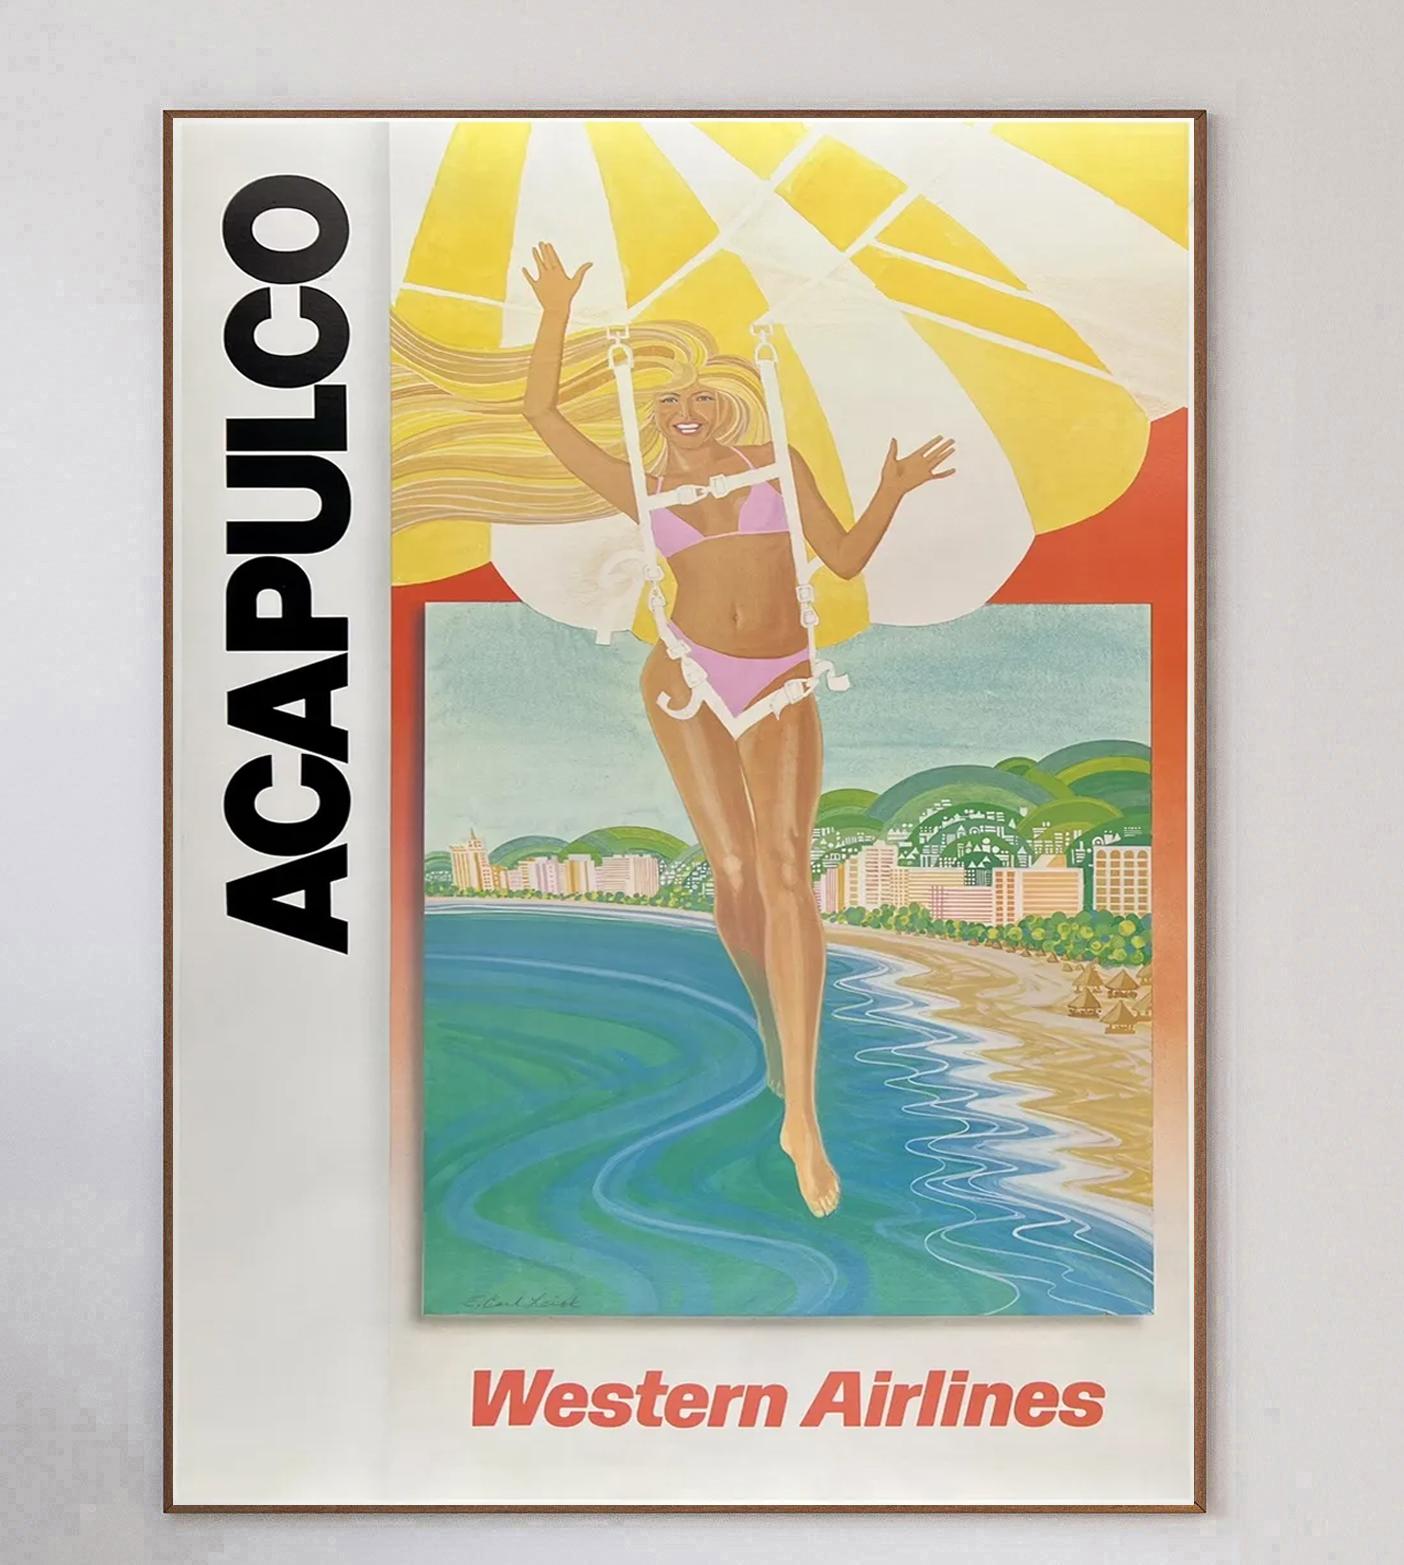 This beautiful and vibrant piece was created in 1980 to advertise Western Airlines routes to Acapulco. Featuring stunning artwork by E. Carl Leick depicting a woman paragliding over the beautiful beach, this poster for the Mexican coast destination